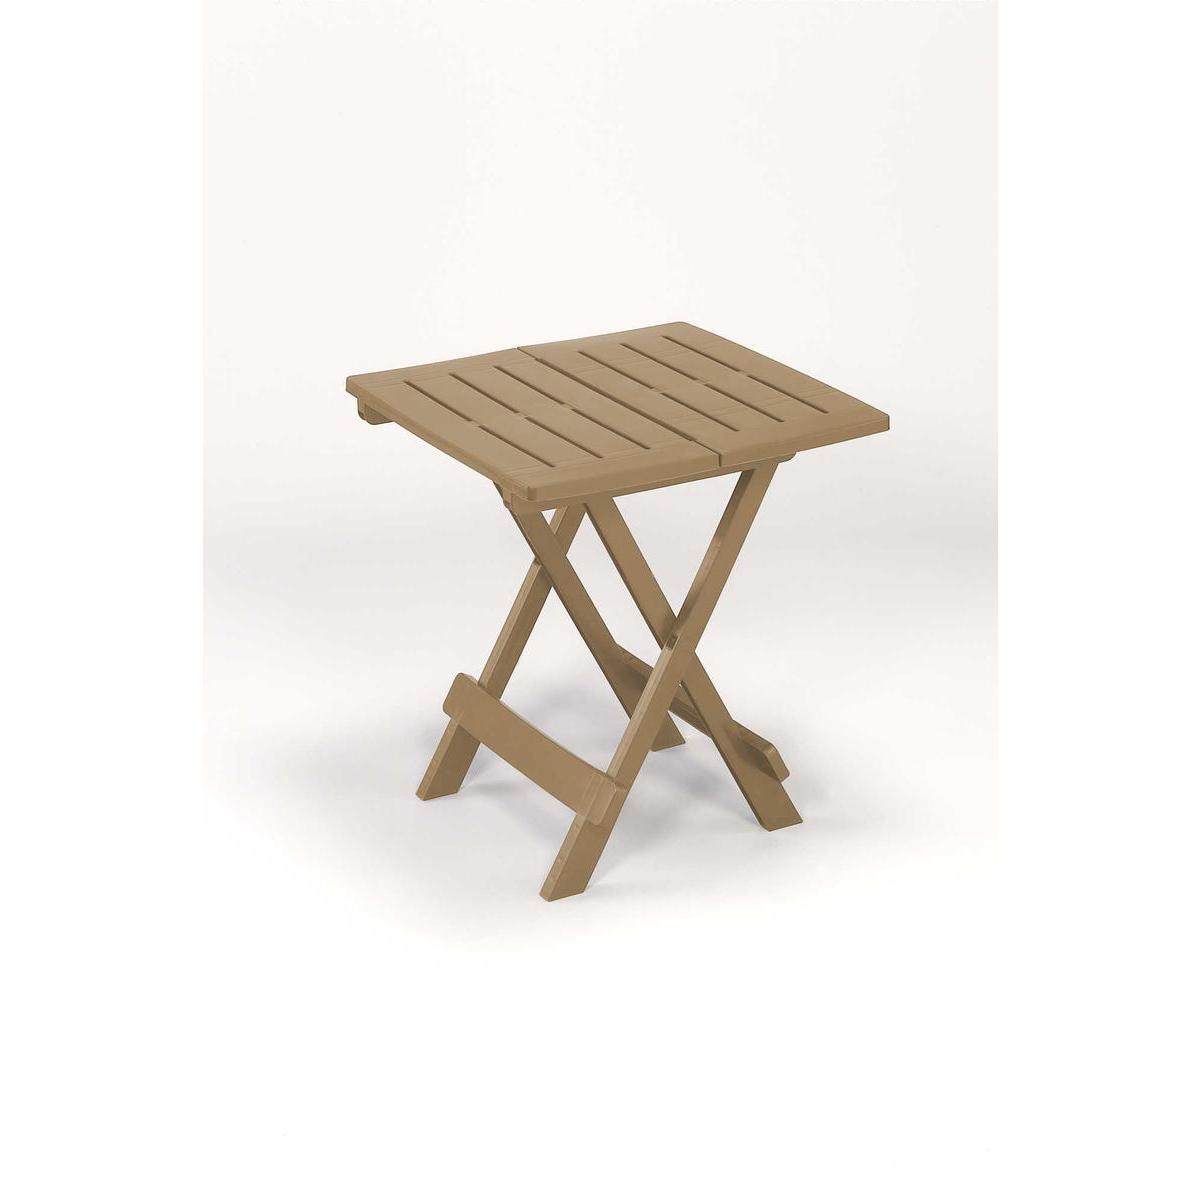 Table d'appoint Adiko - 44 x 44 x H 50 cm - Marron taupe